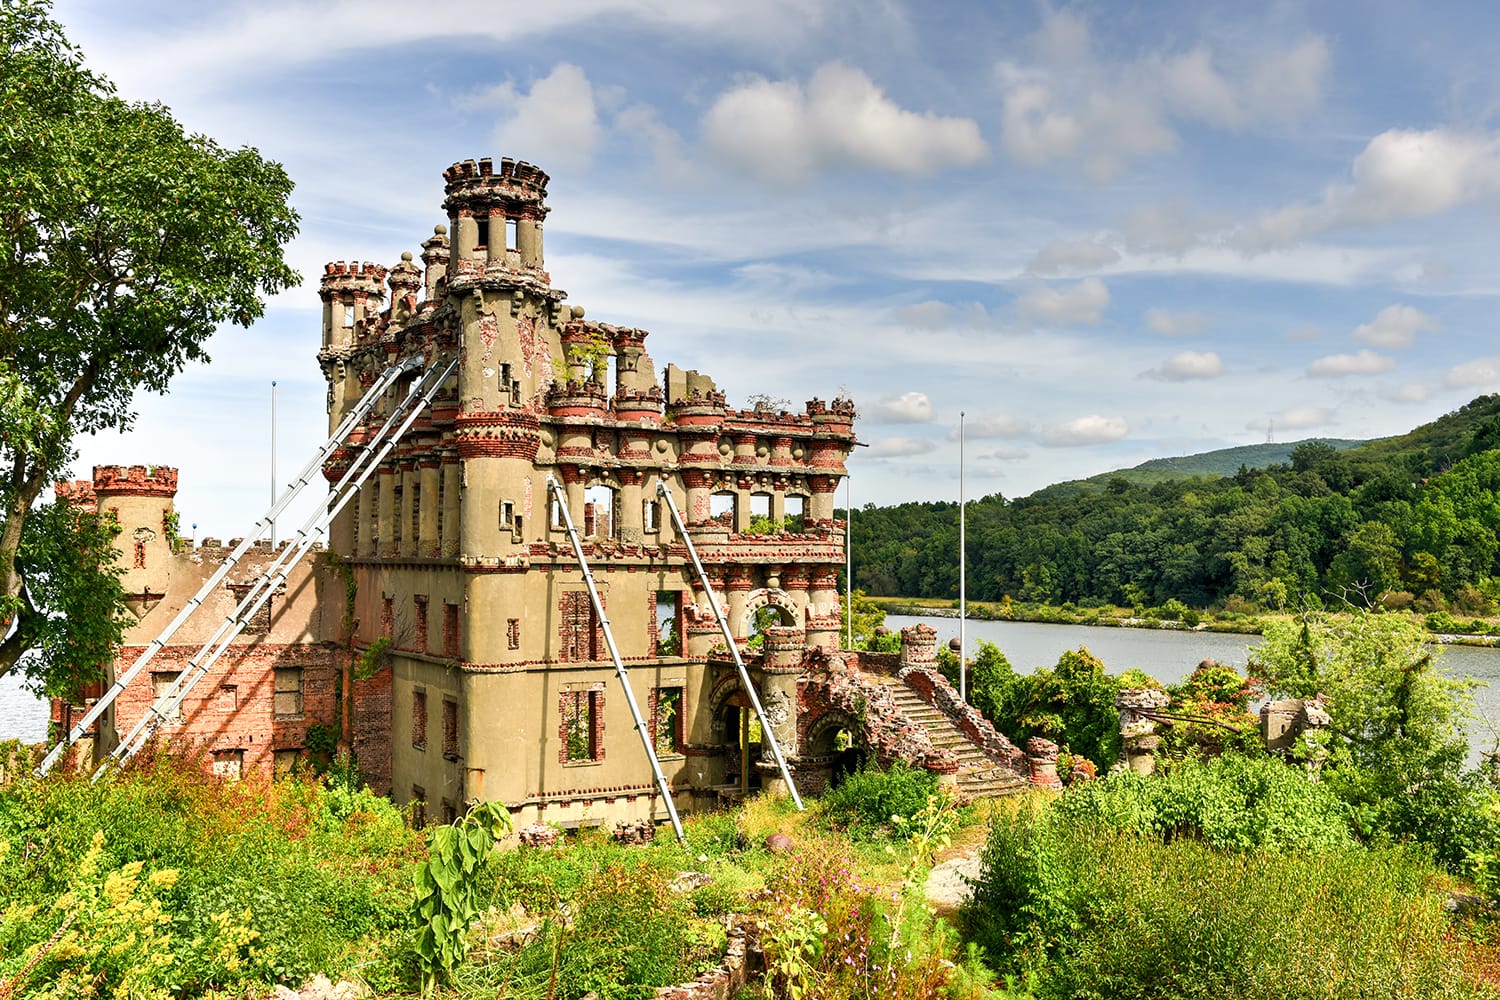 Bannerman Castle Armory on Pollepel Island in the Hudson River, New York, USA